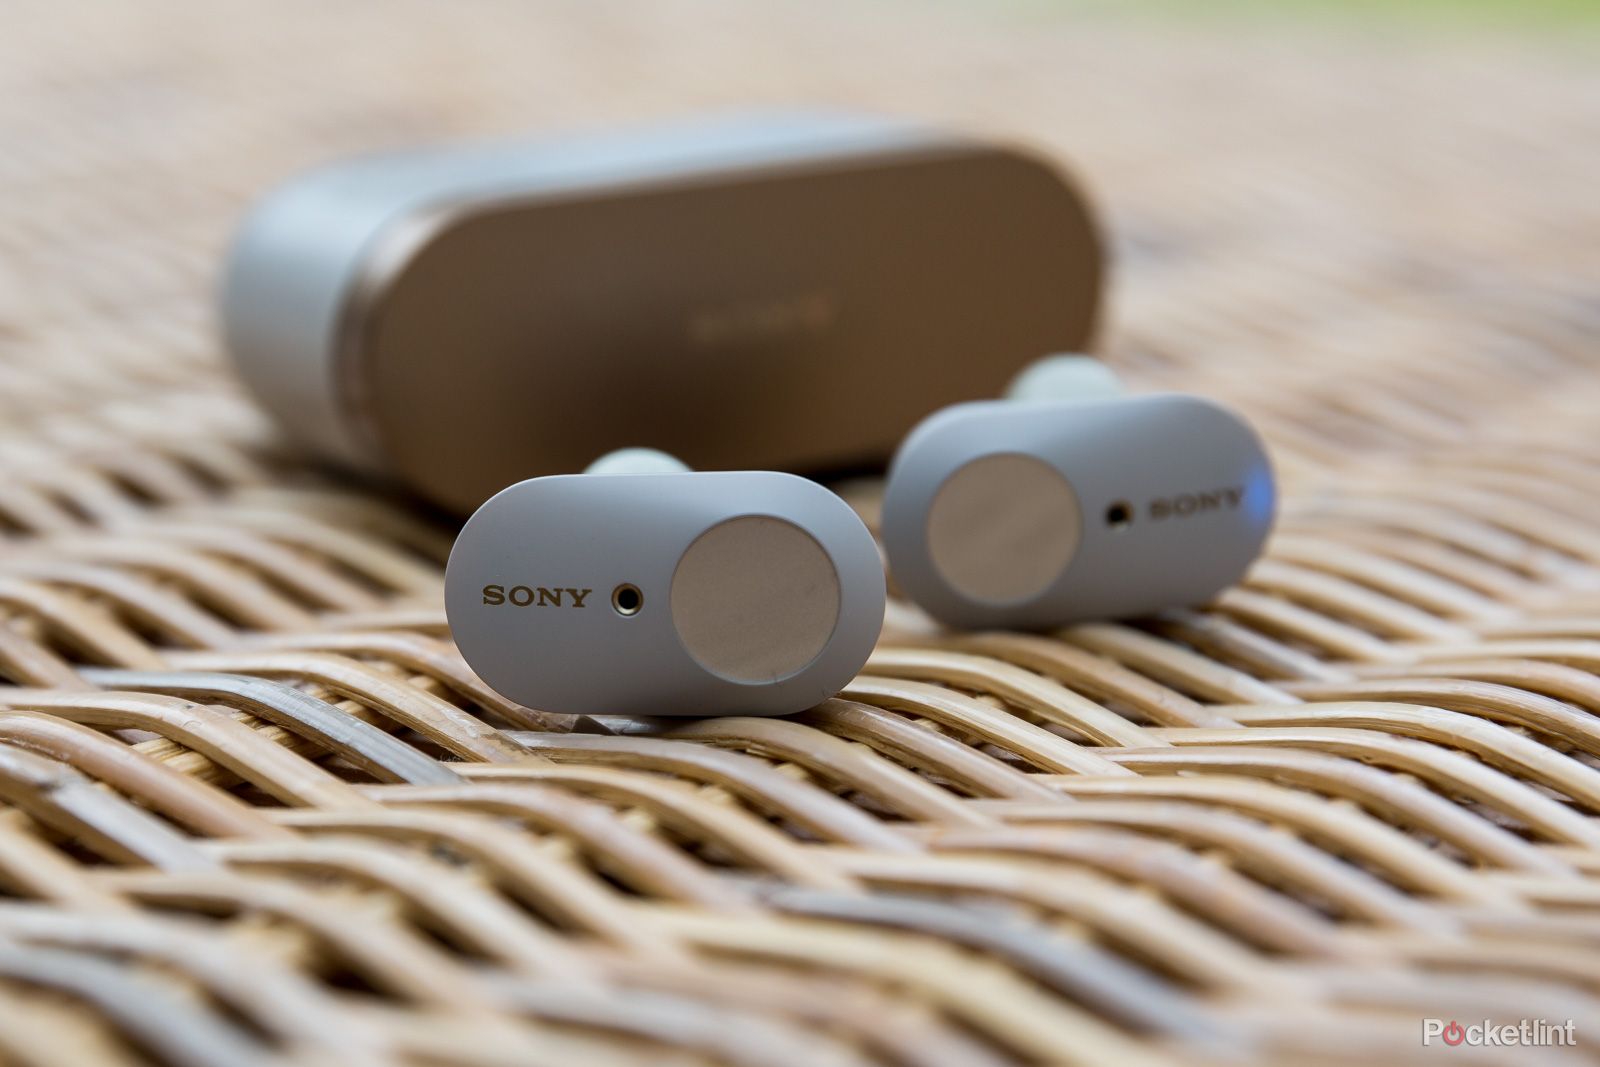 Sony might launch its WF-1000XM4 wireless earbuds soon with some nice upgrades photo 1